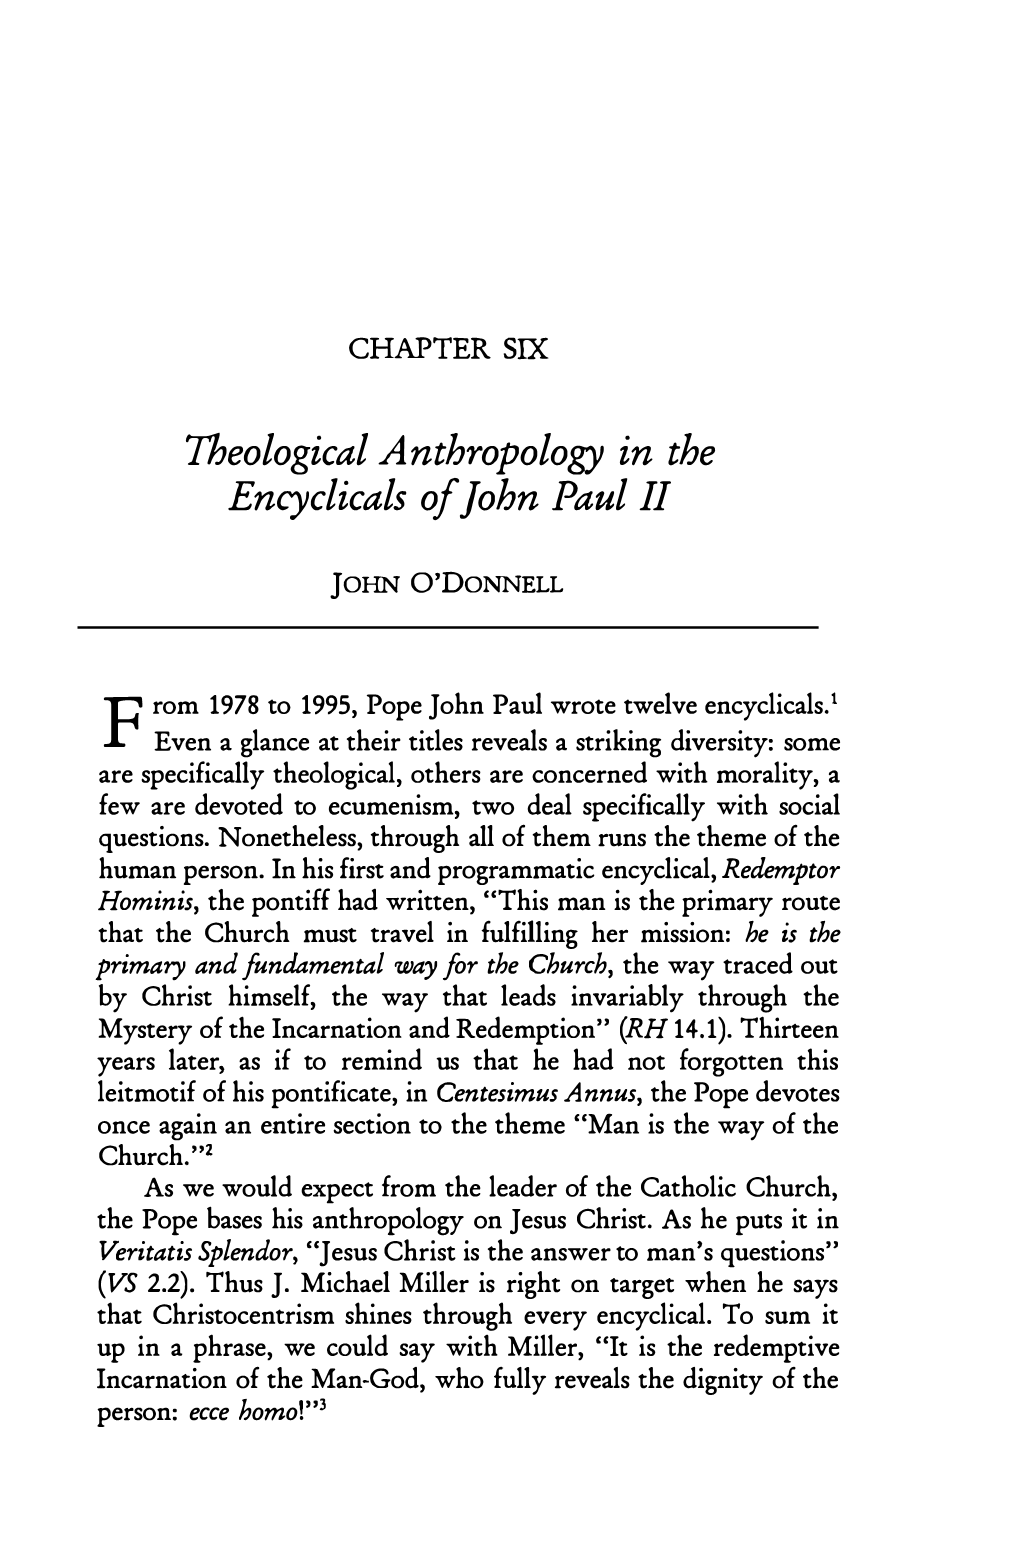 Theological Anthropology in the Encyclicals of John Paul II